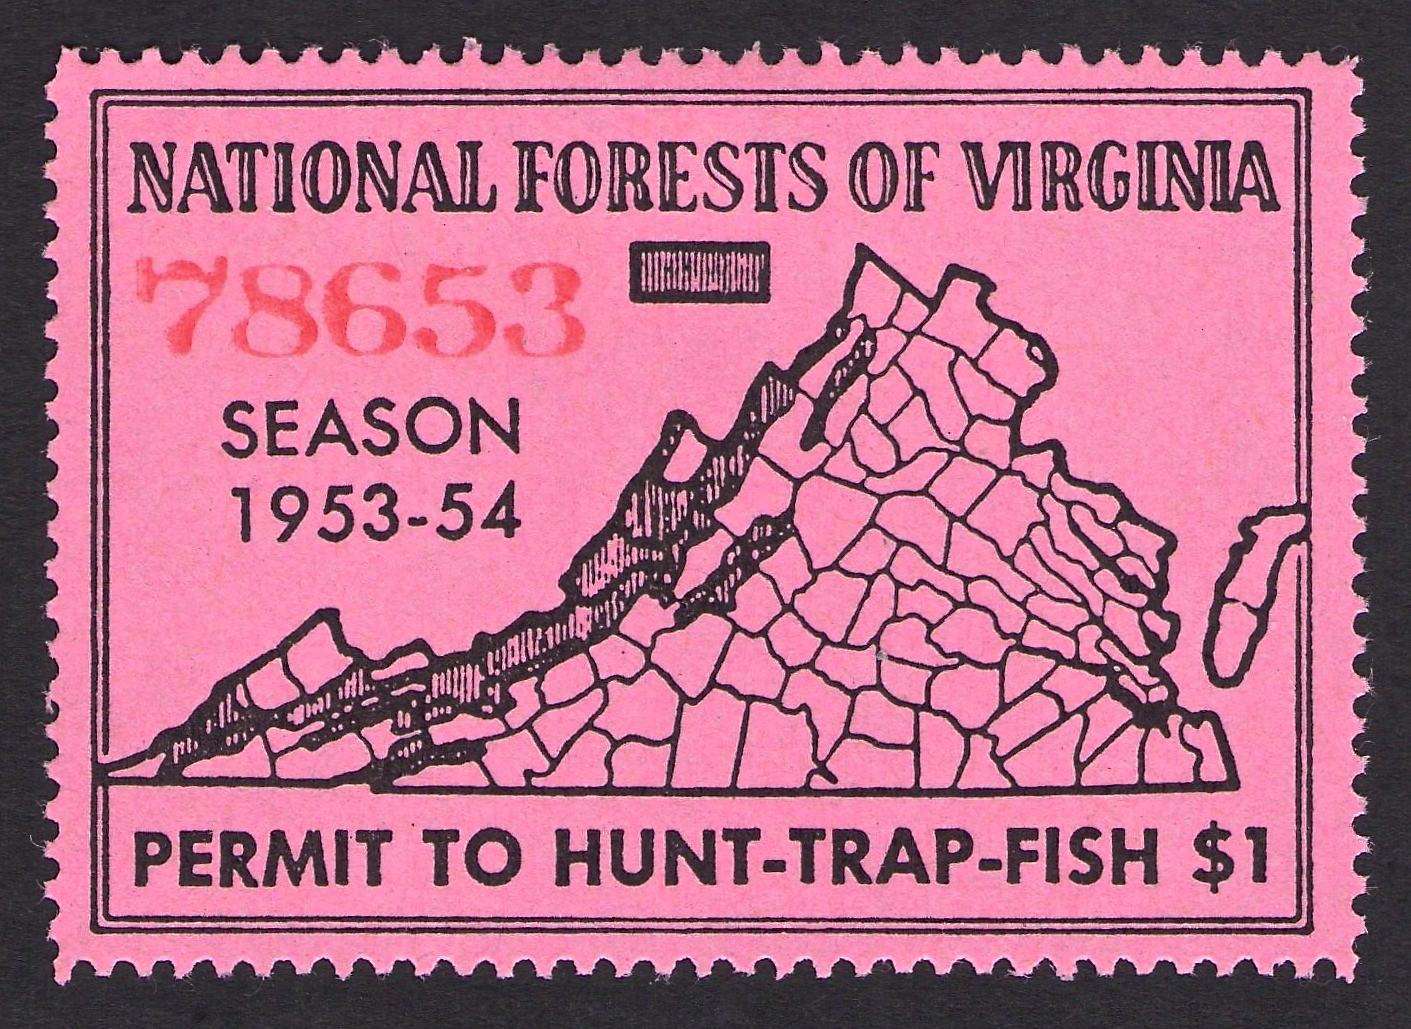 1953-54 National Forest Virginia